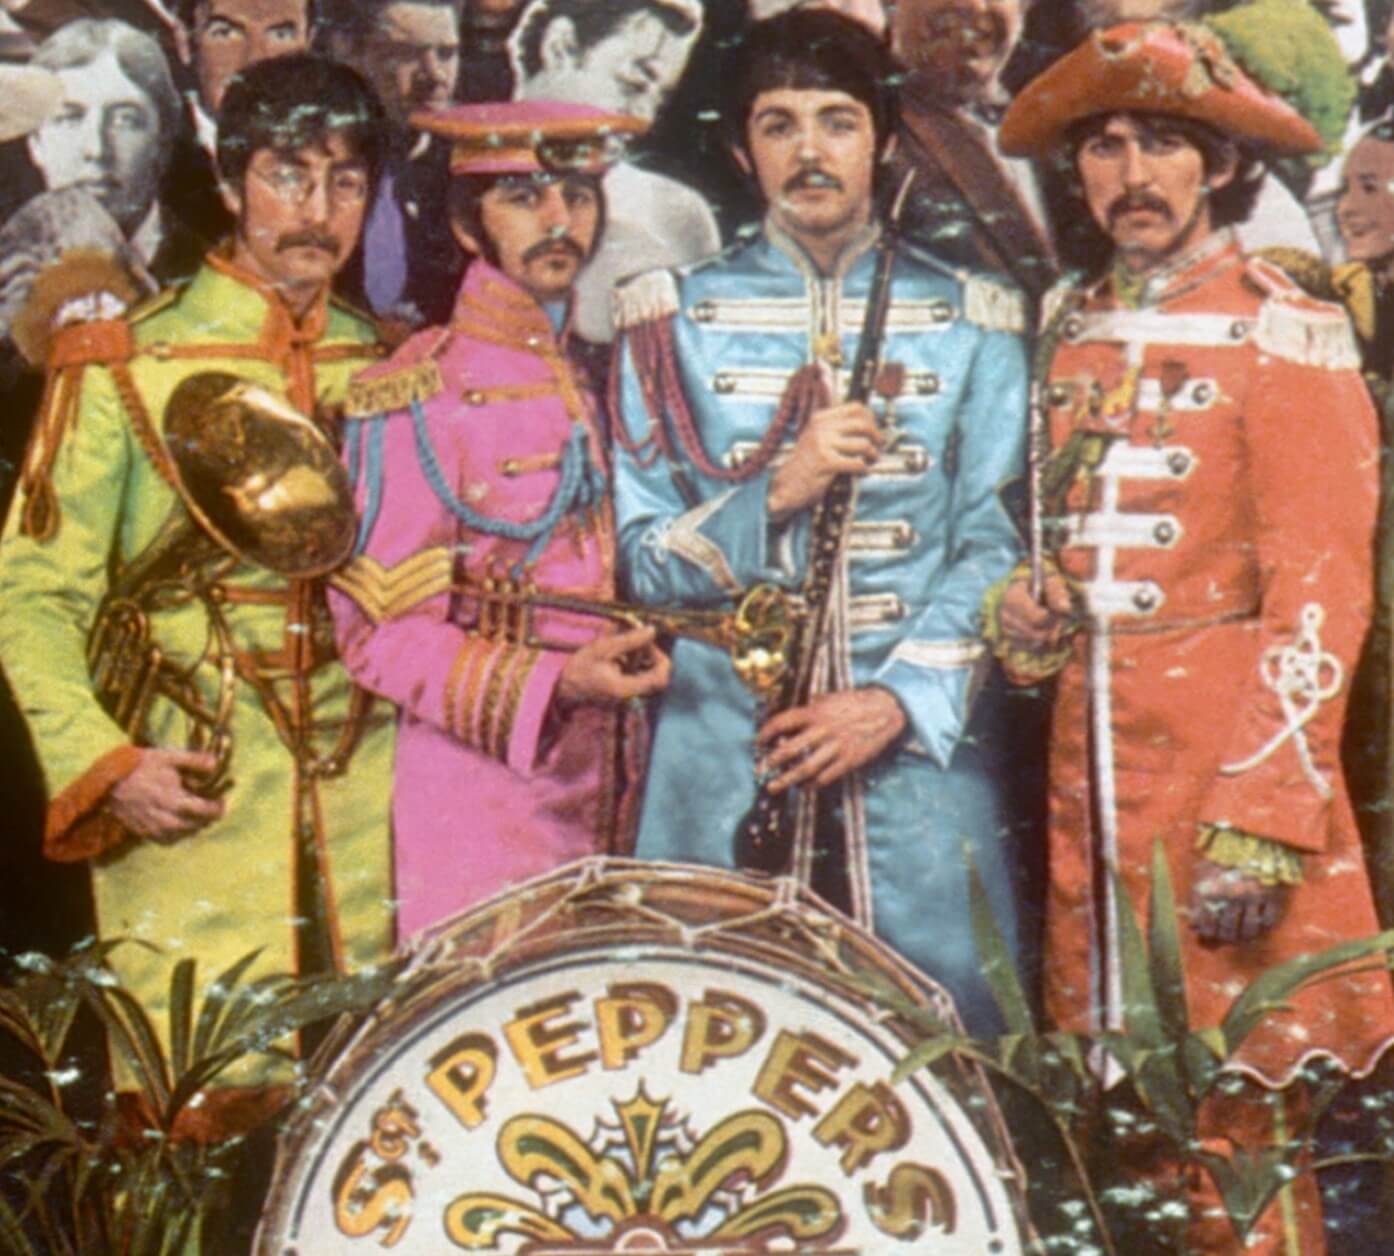 The Beatles on the cover of 'Sgt. Pepper's Lonely Hearts Club Band'